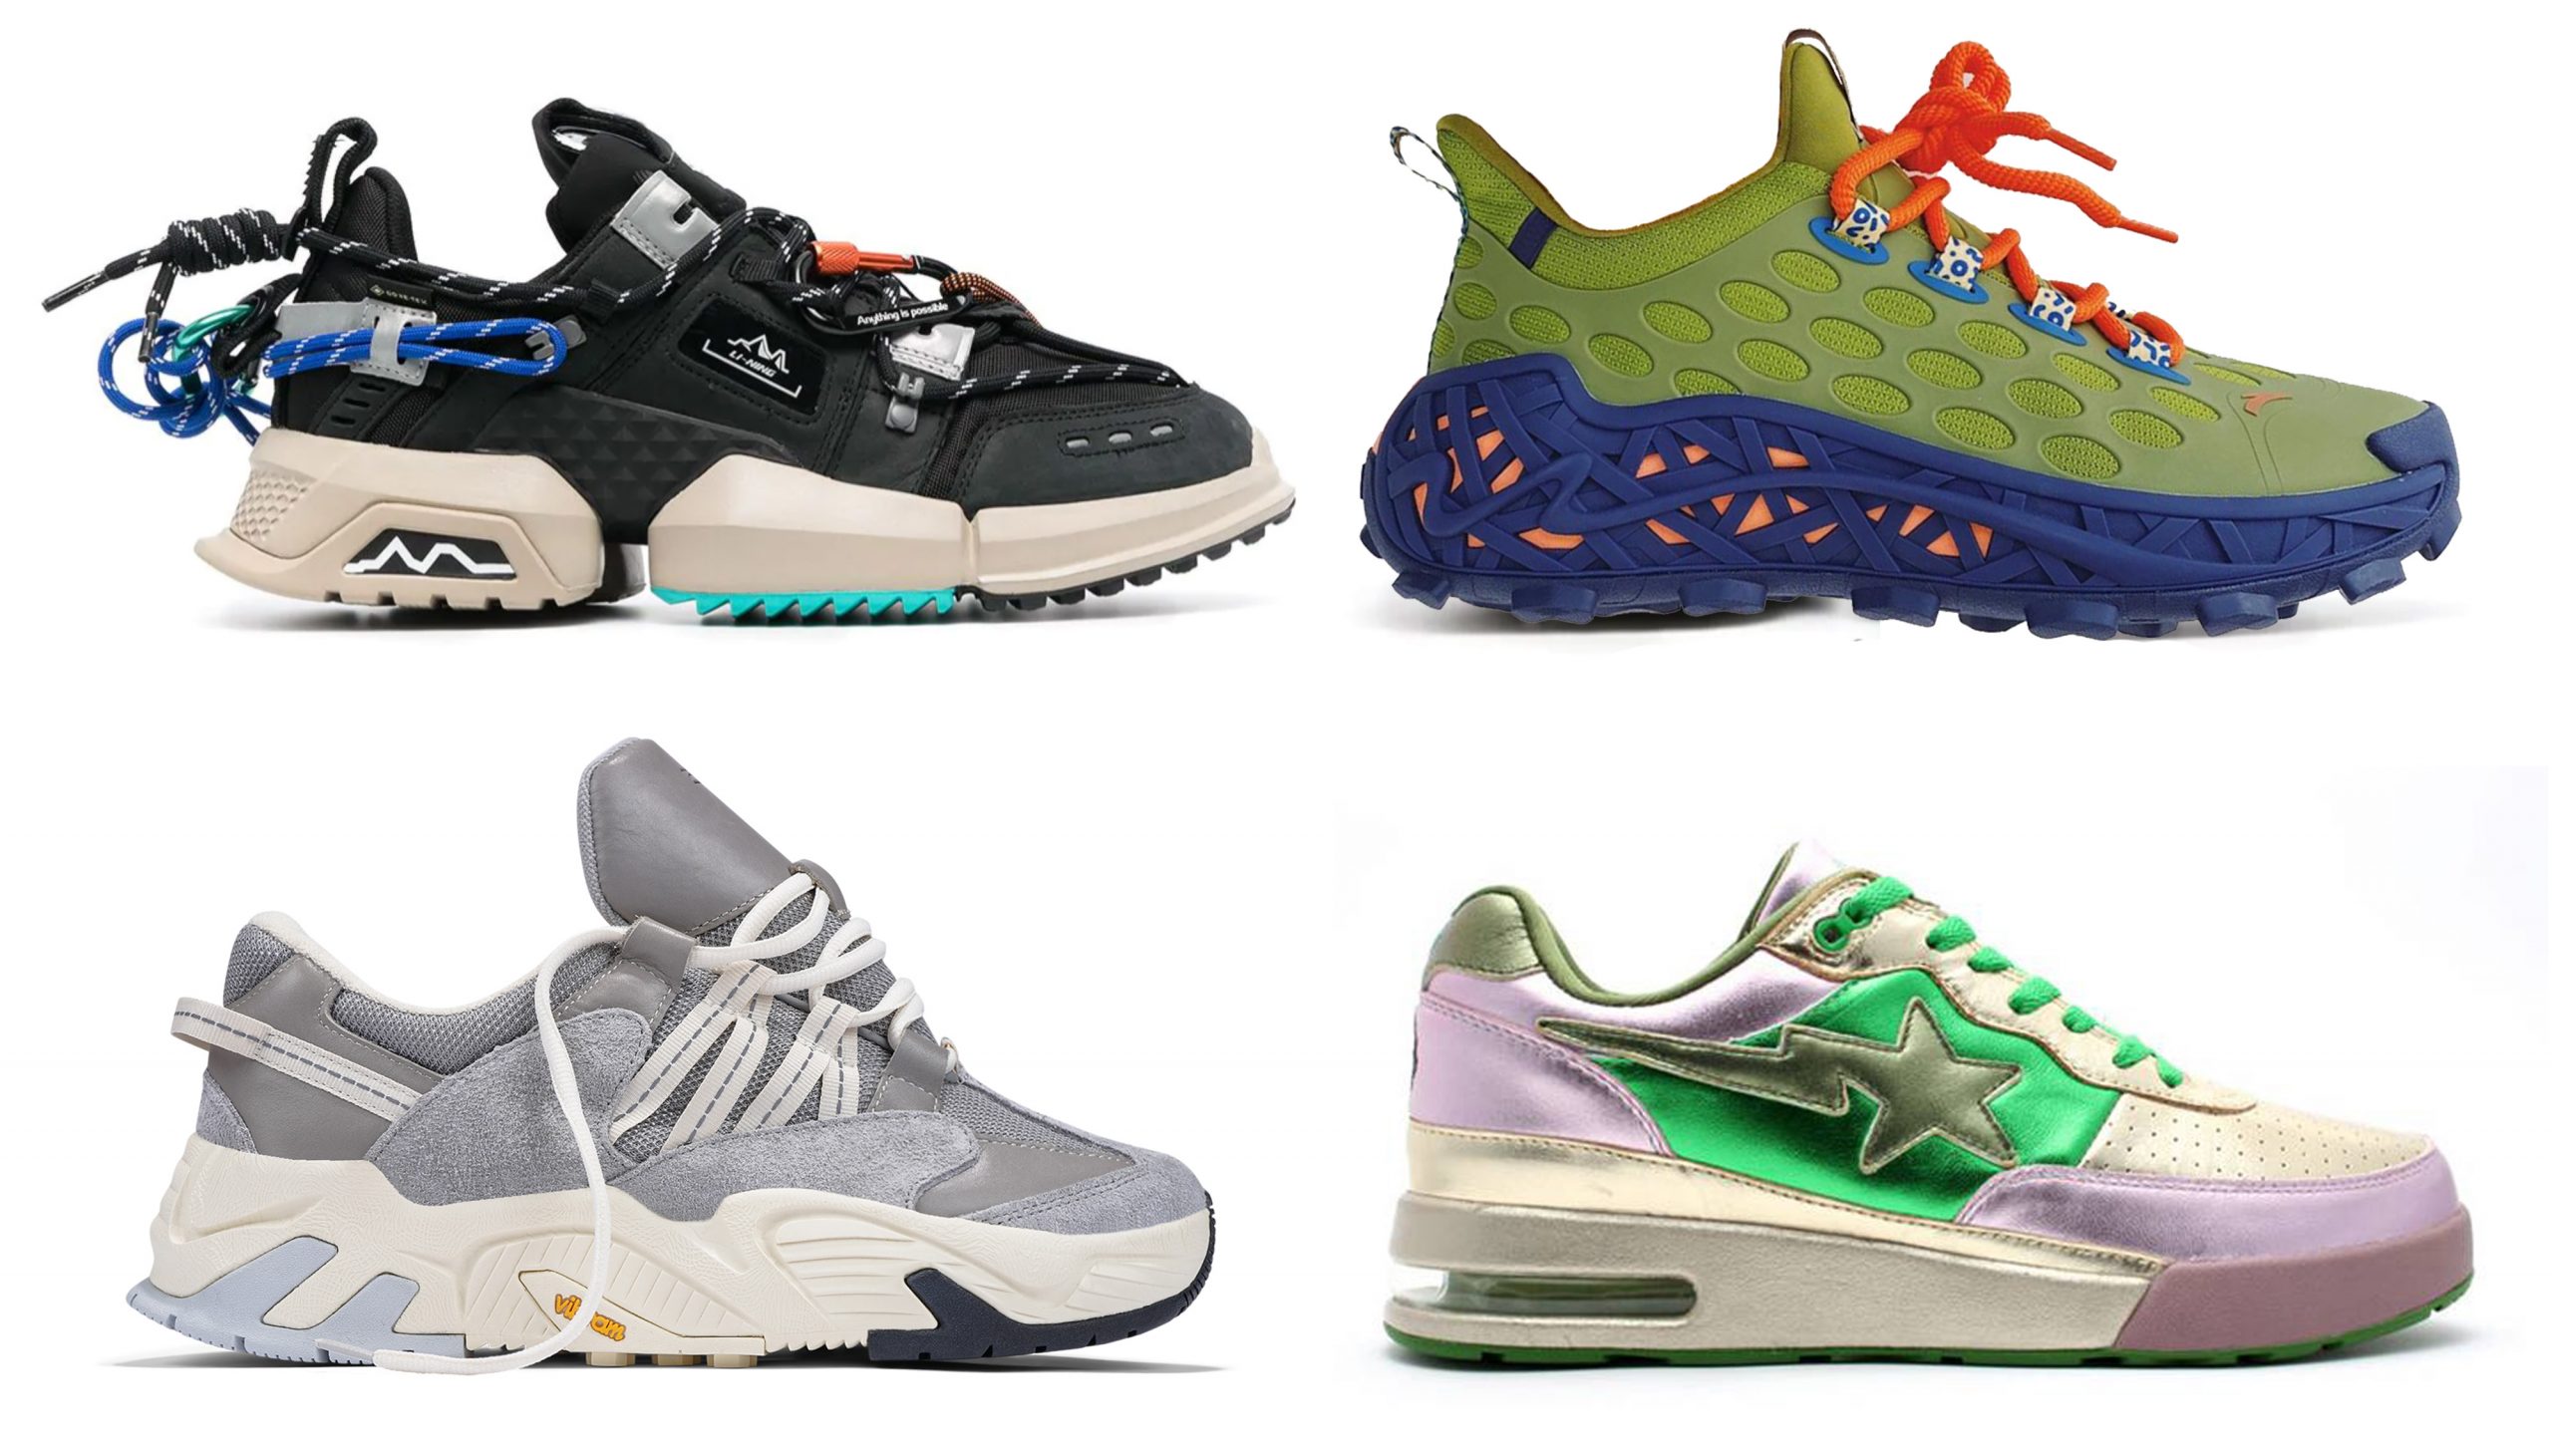 Predicting the Sneaker Trends That Will Own 2021 | SoleSavy News